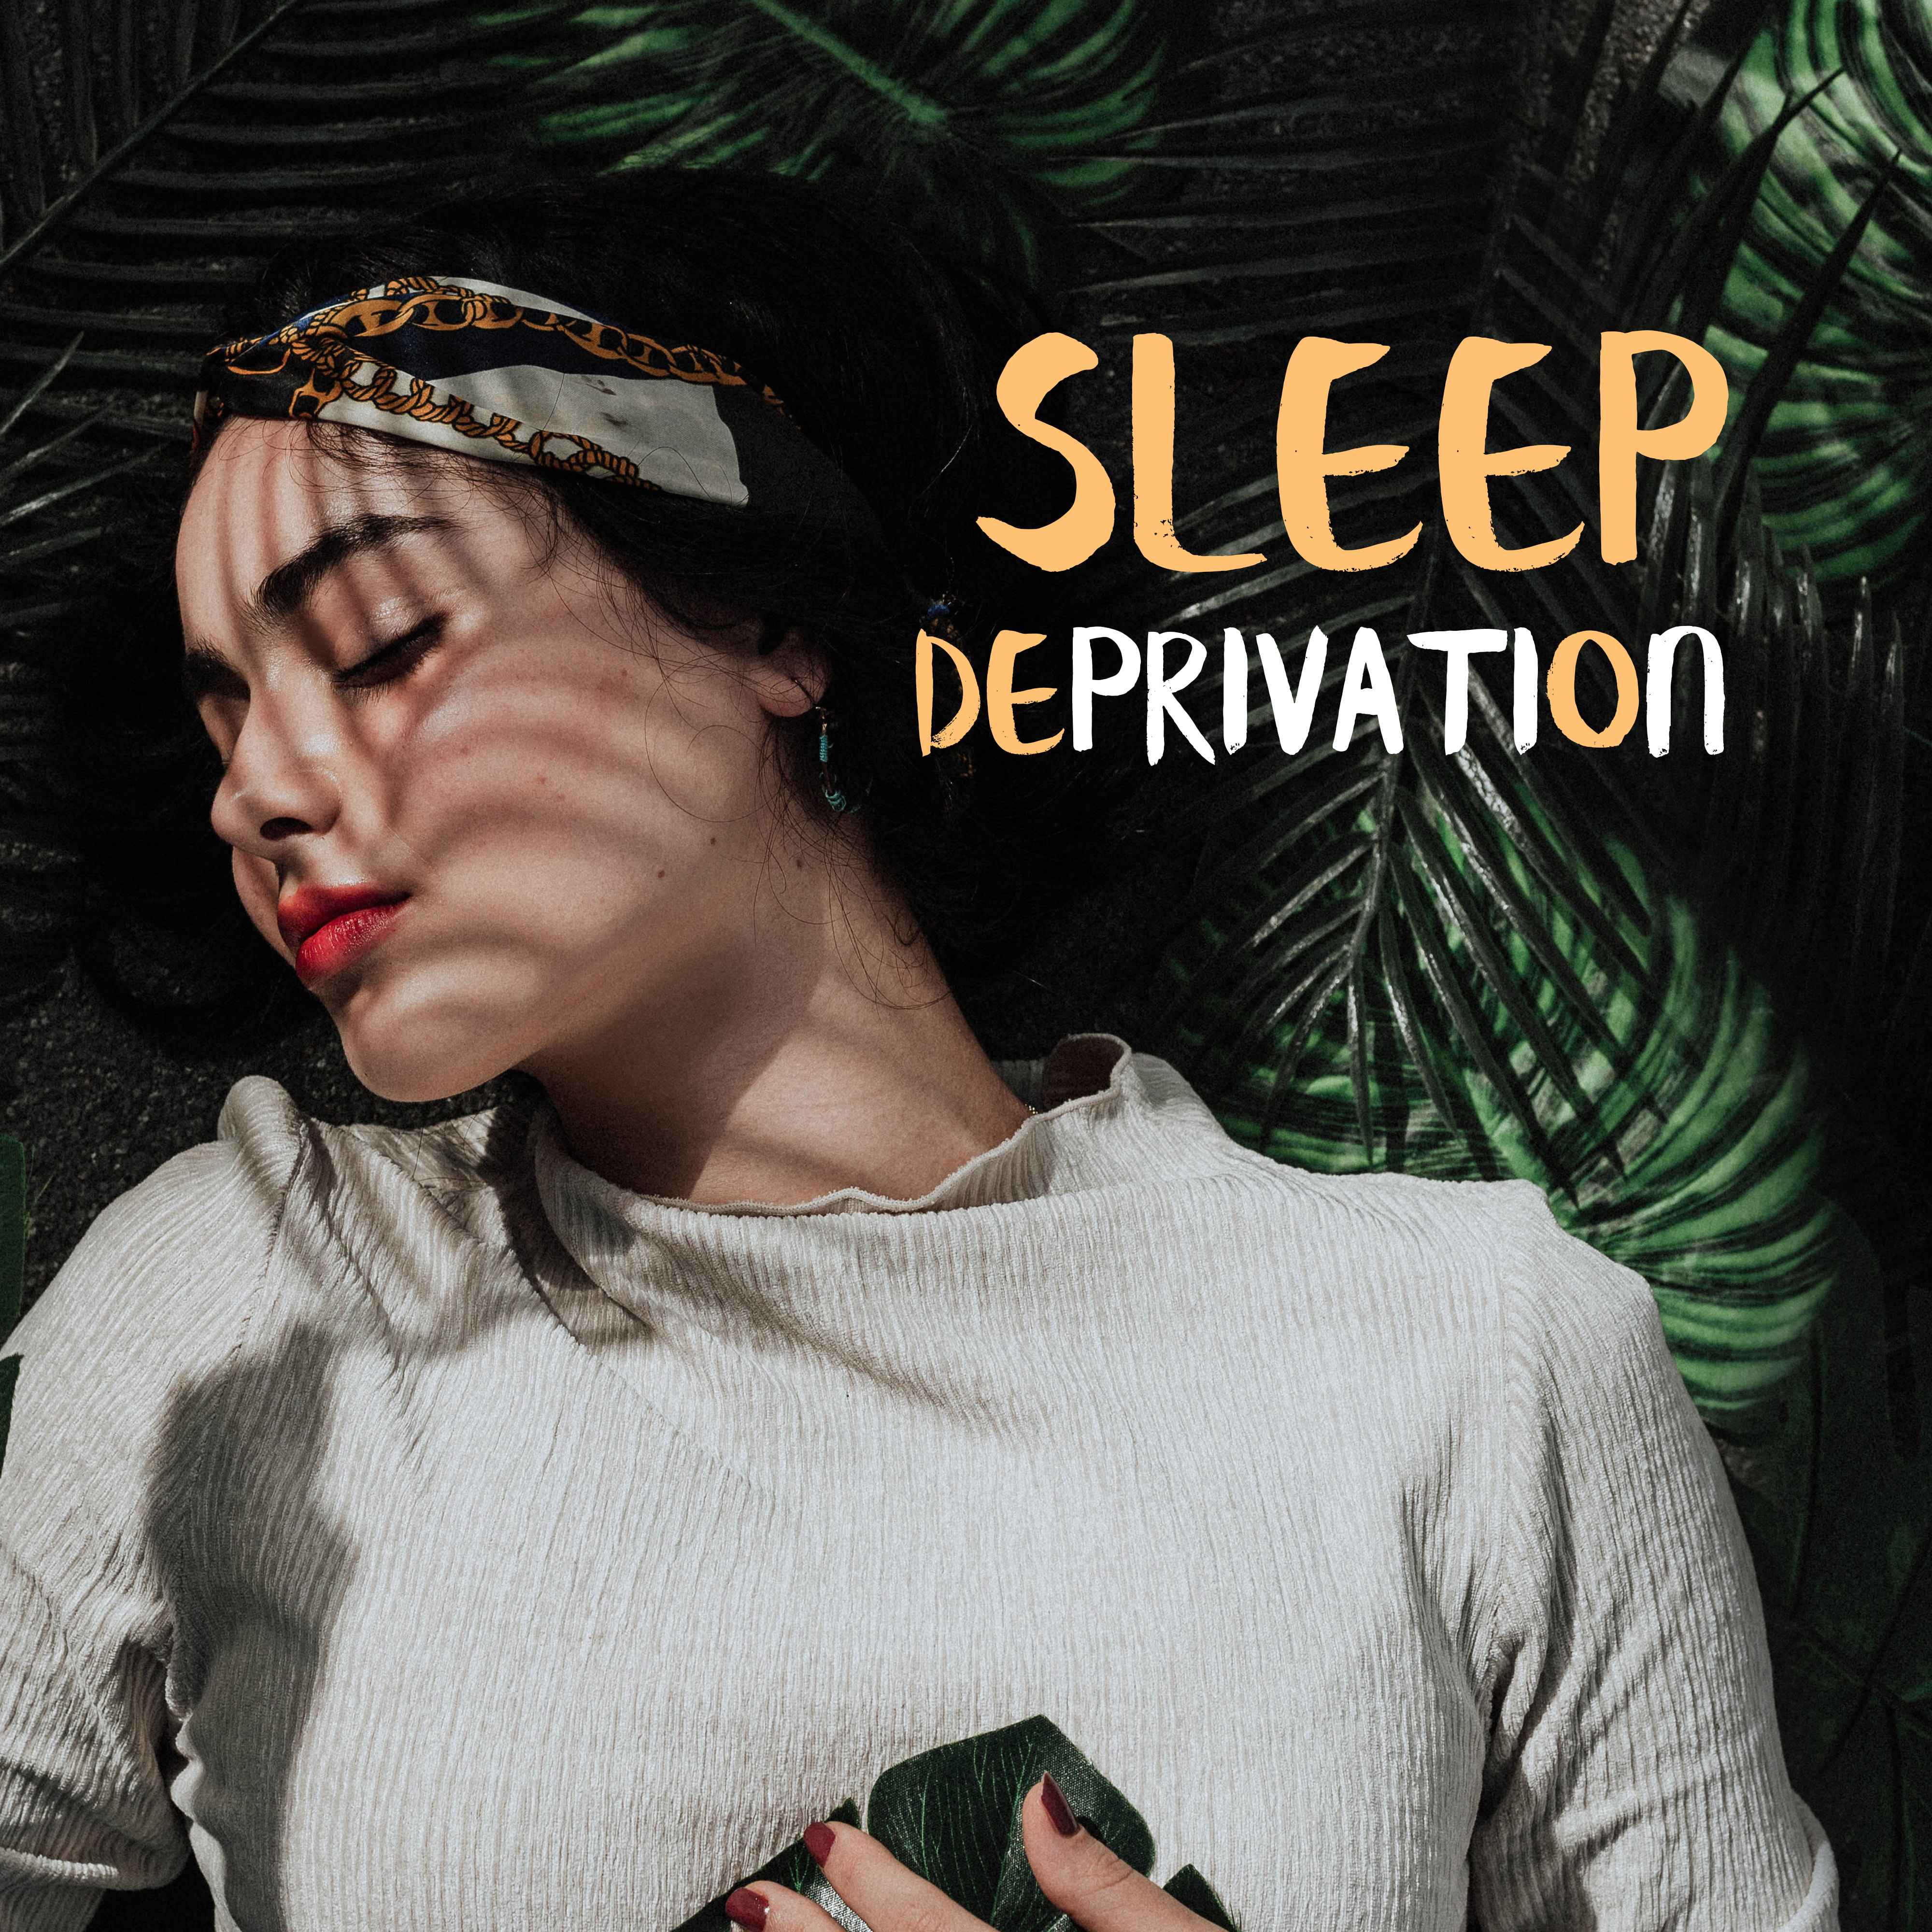 Sleep Deprivation - Healing, Quiet and Soothing Music to Sleep